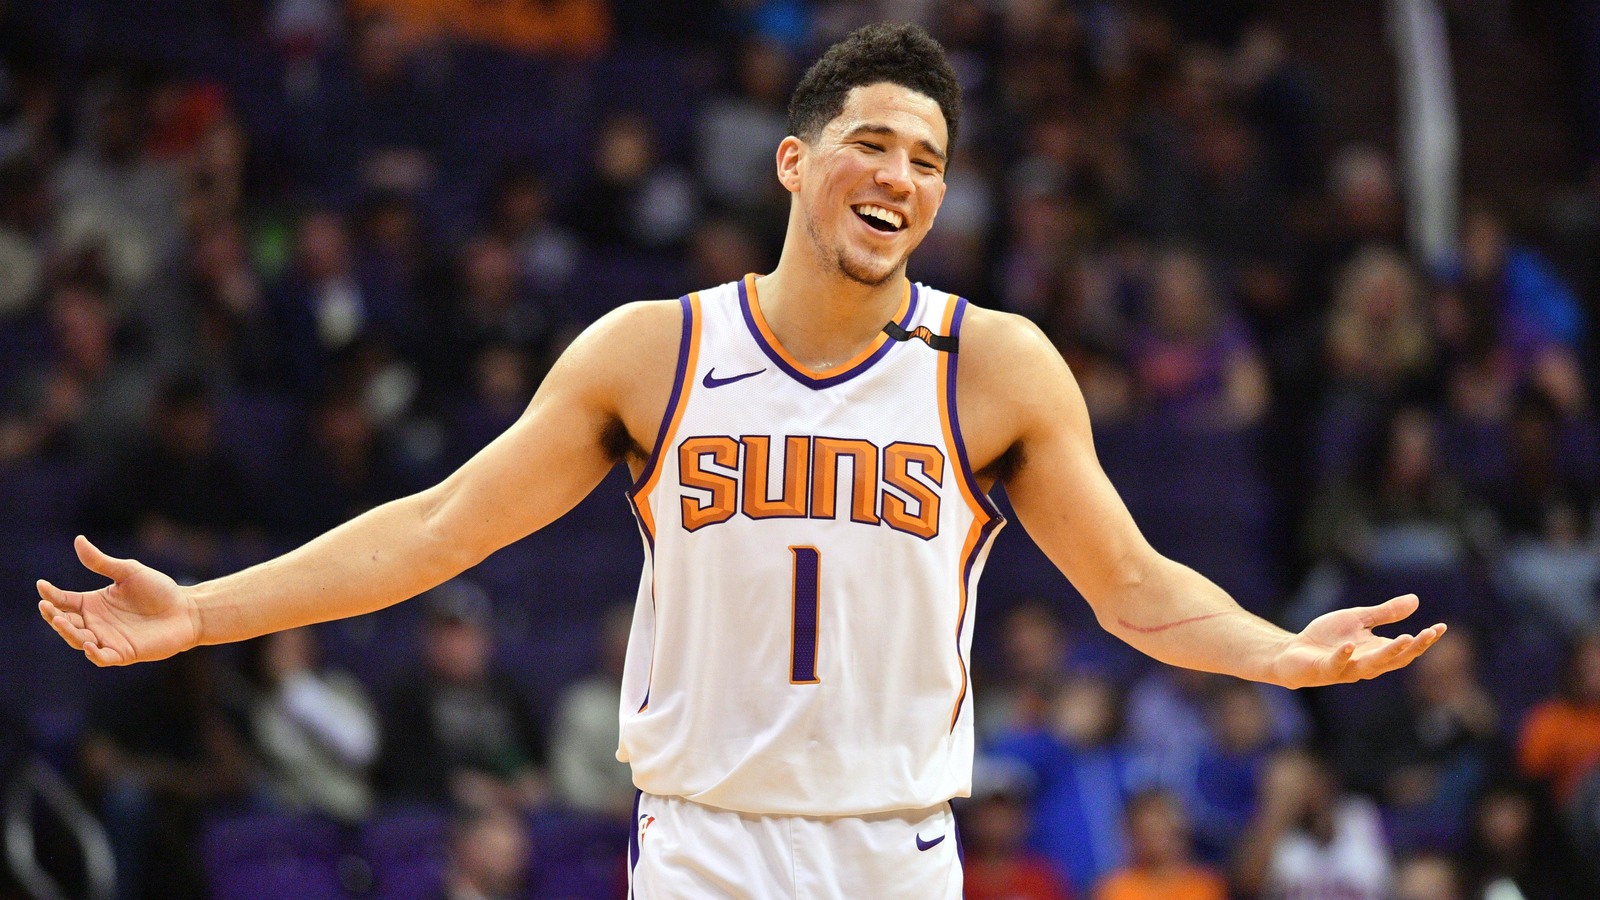 Devin Booker could be getting max contract from Suns | Yardbarker.com